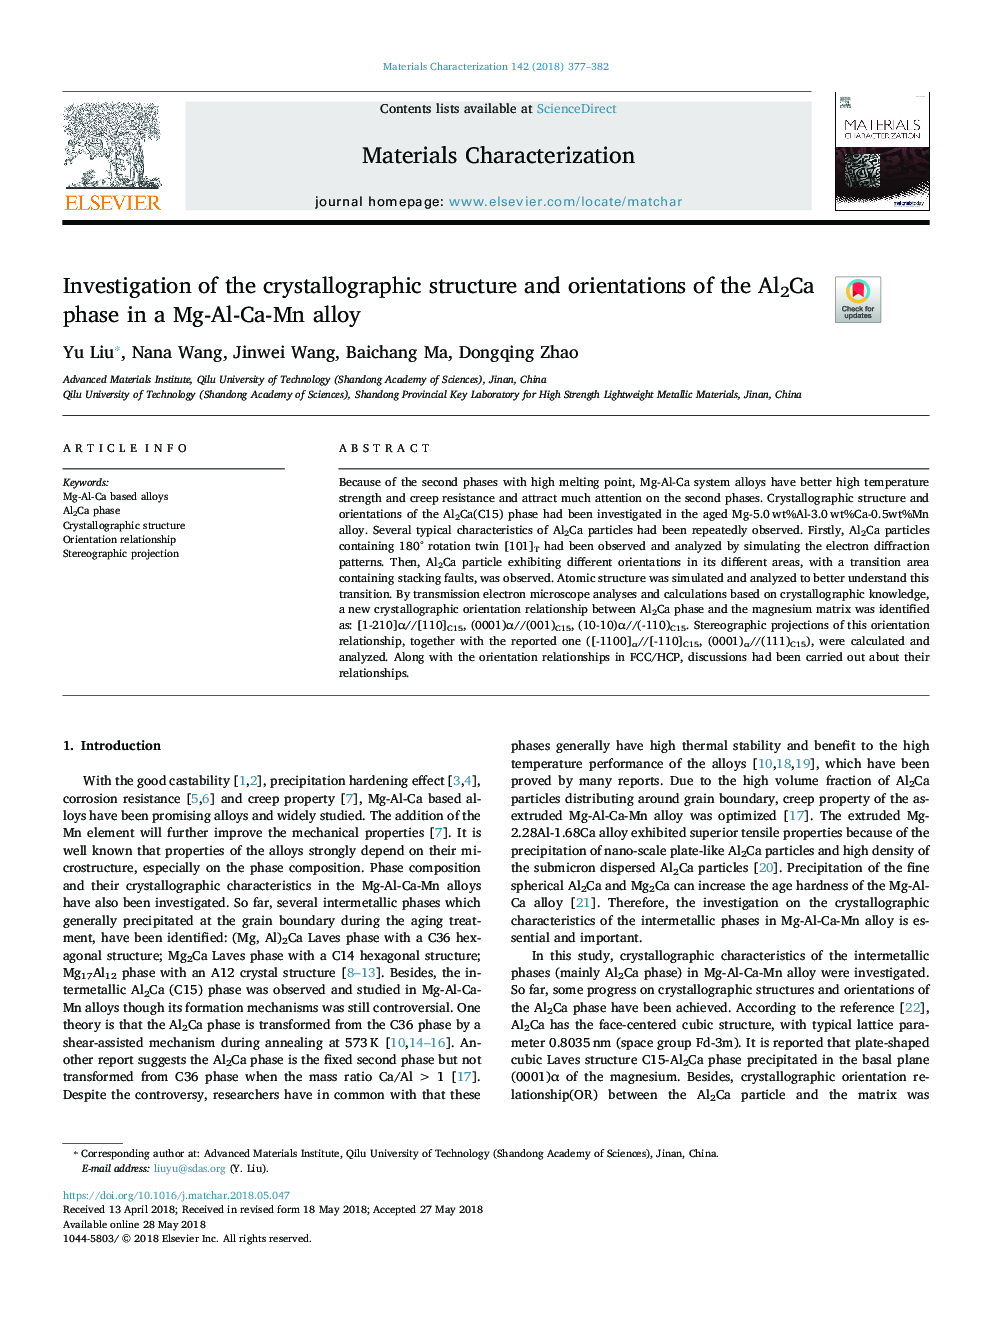 Investigation of the crystallographic structure and orientations of the Al2Ca phase in a Mg-Al-Ca-Mn alloy